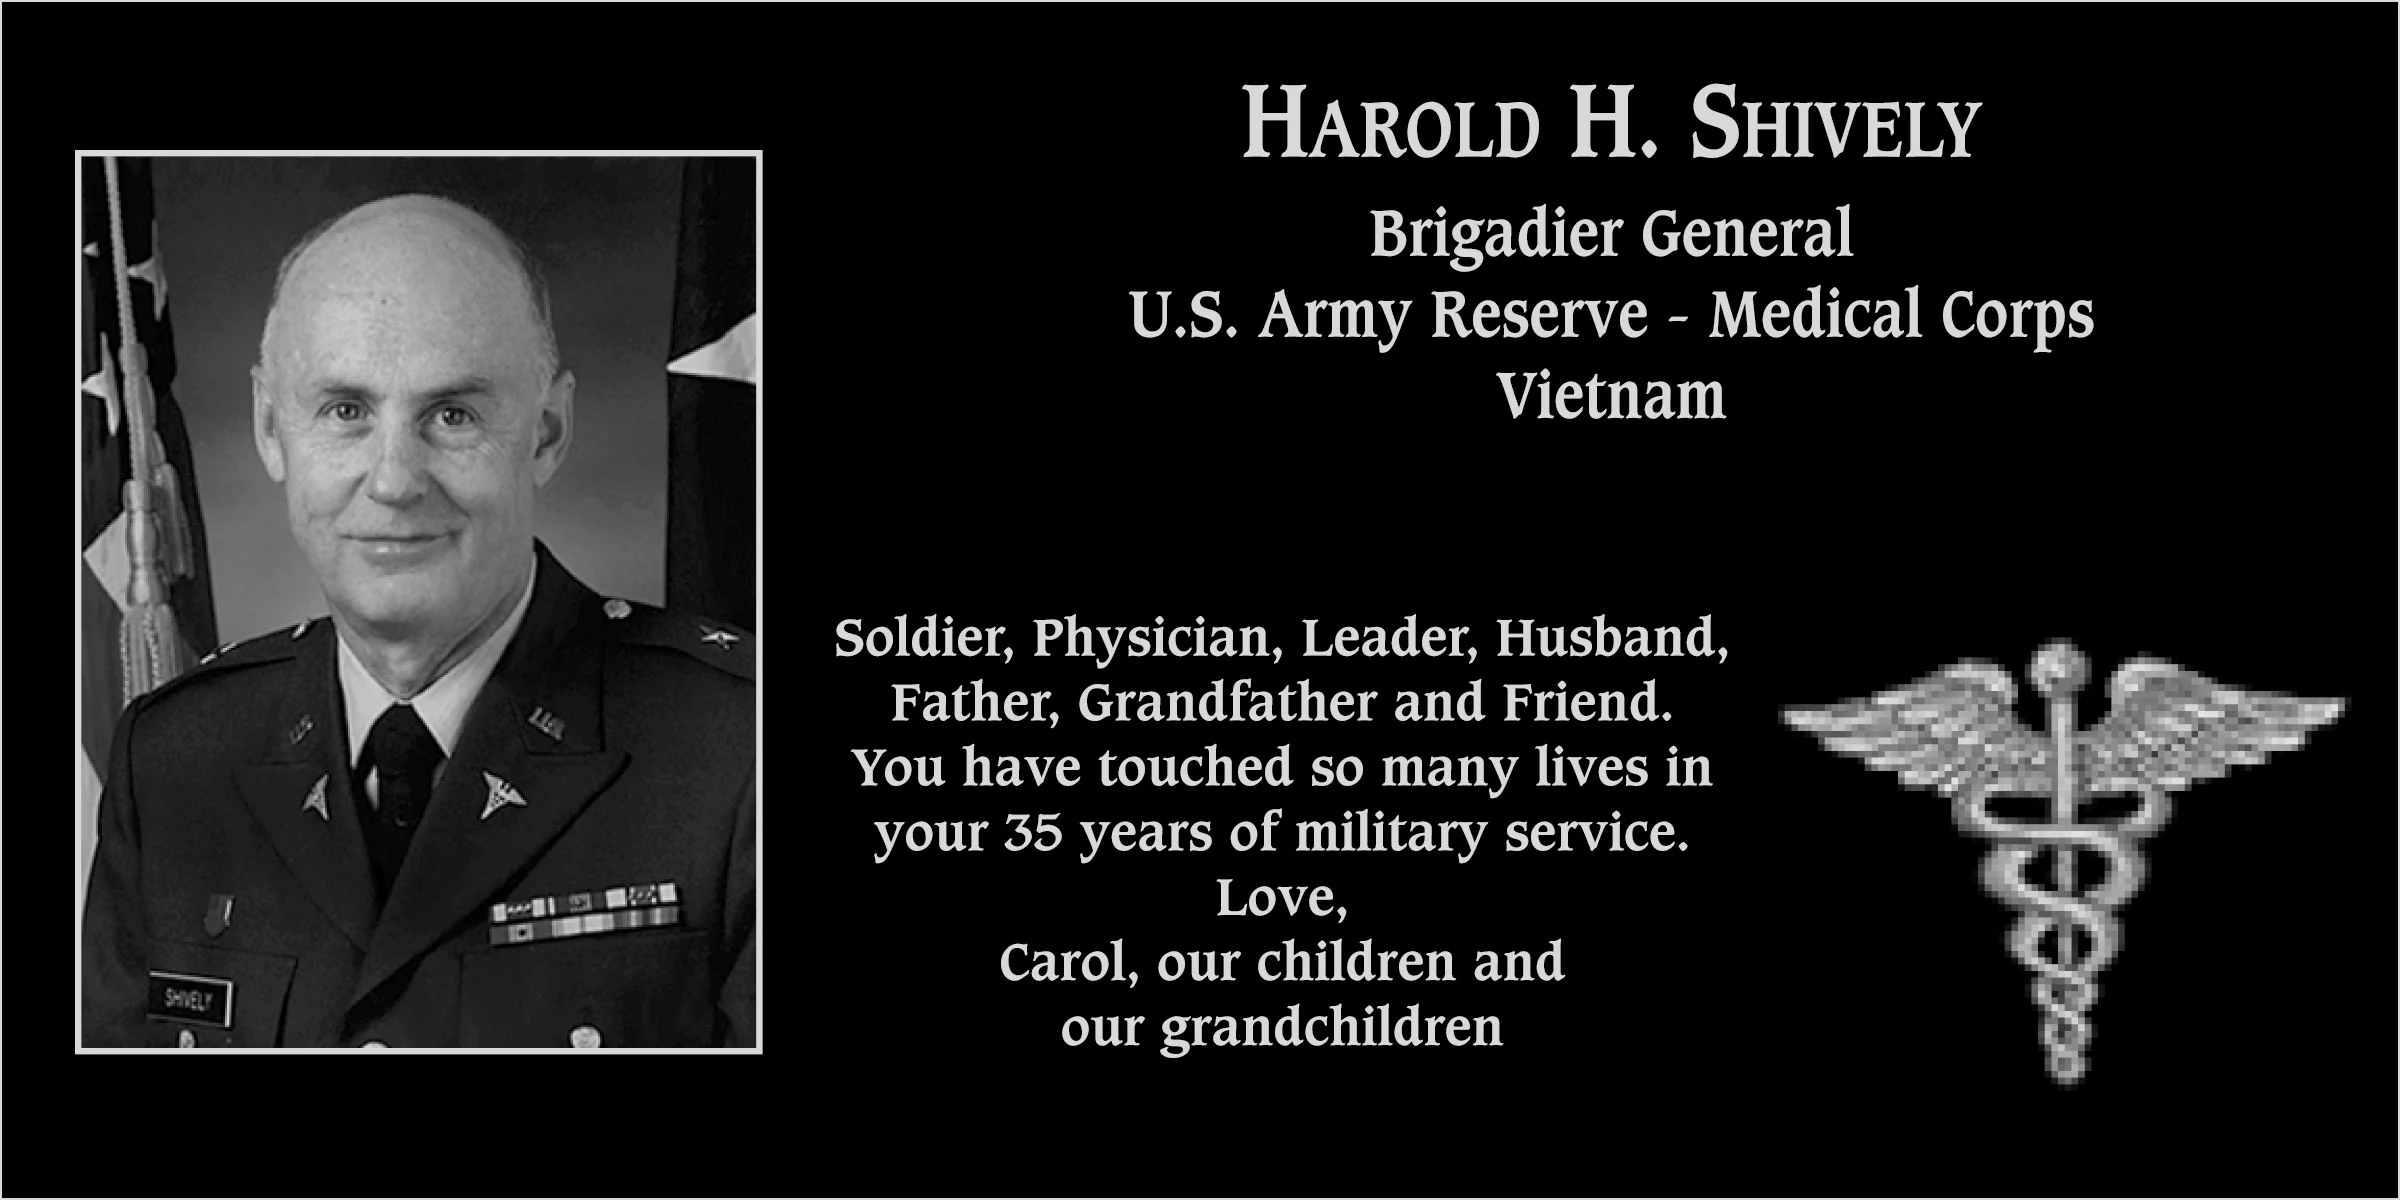 Harold H. Shively